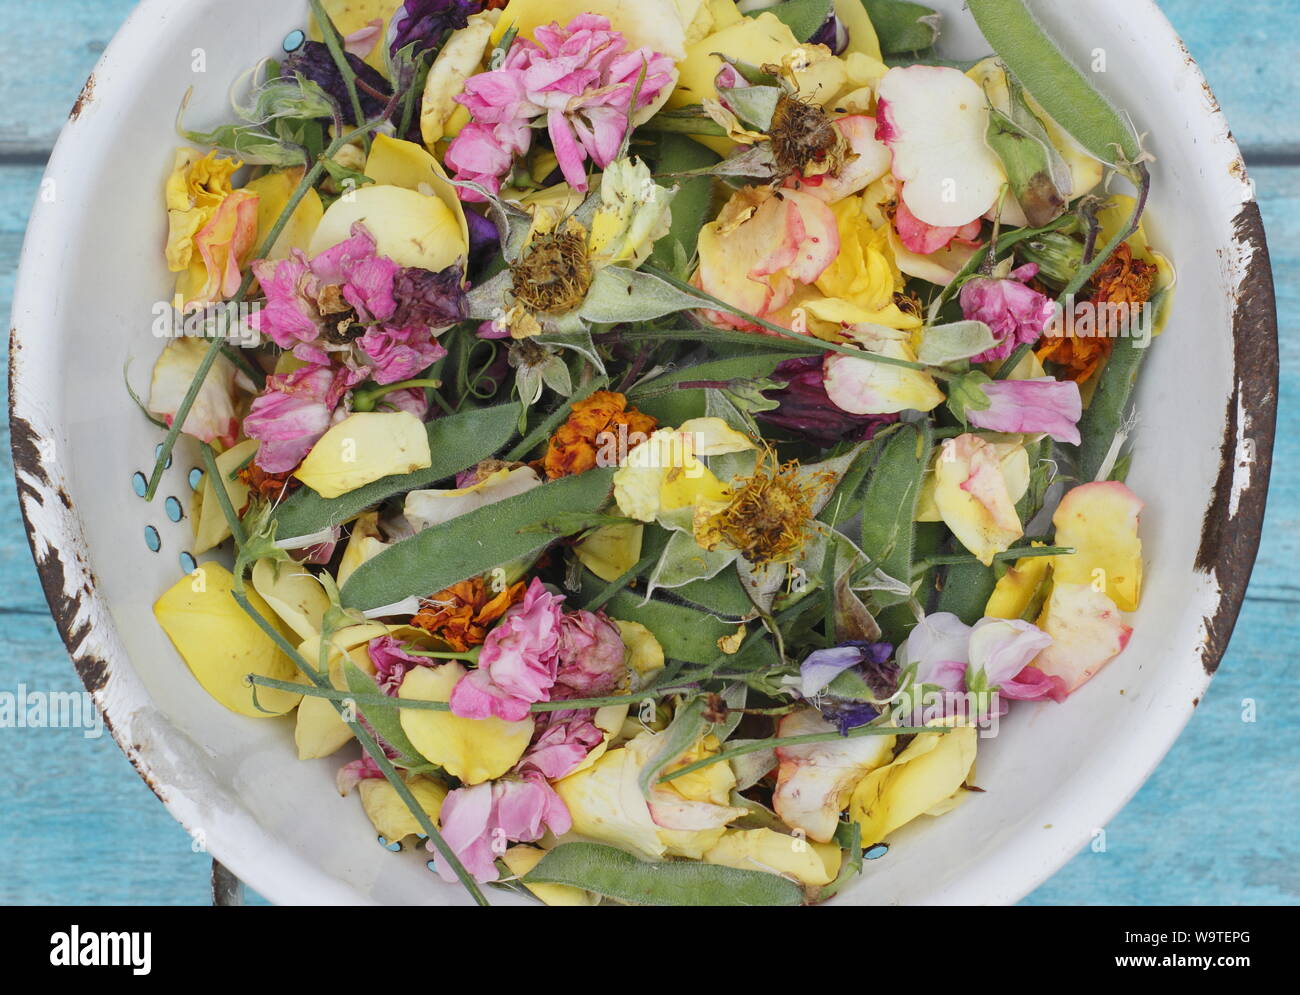 Freshly deadheaded flowers - roses, sweet peas and marigolds - collected into a metal colander in a summer garden. UK Stock Photo